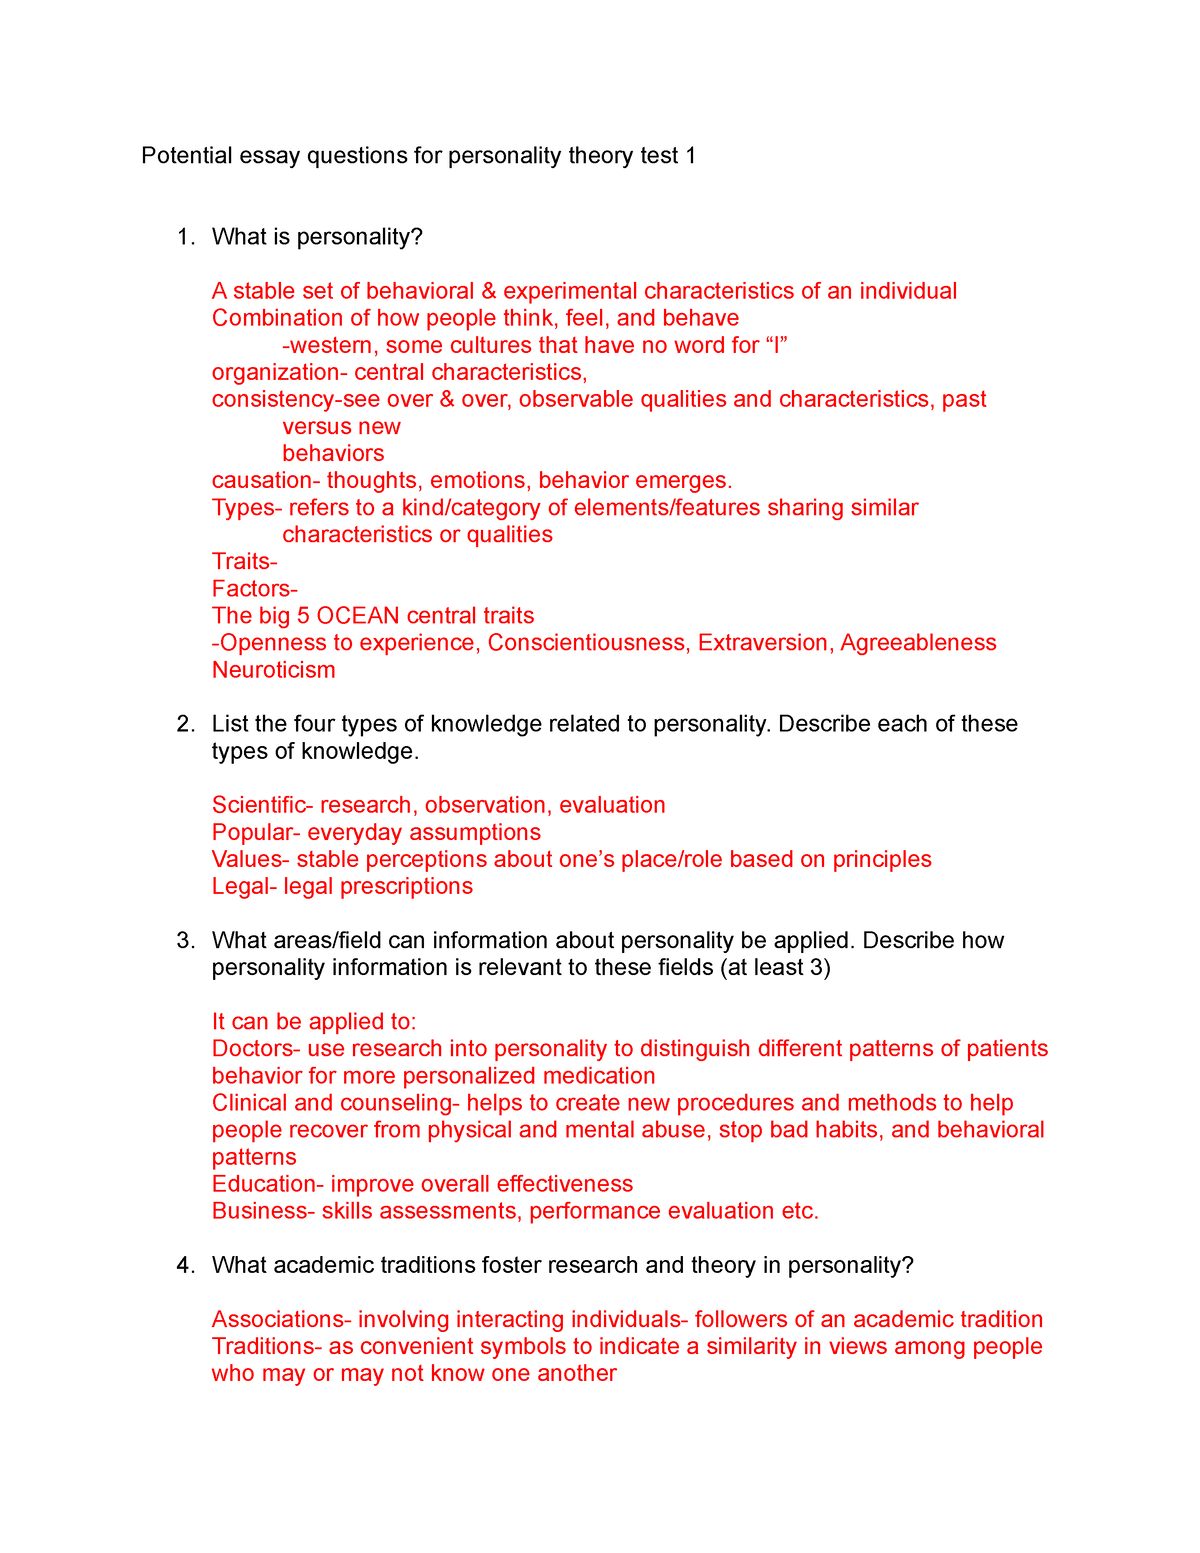 essay questions for personality development